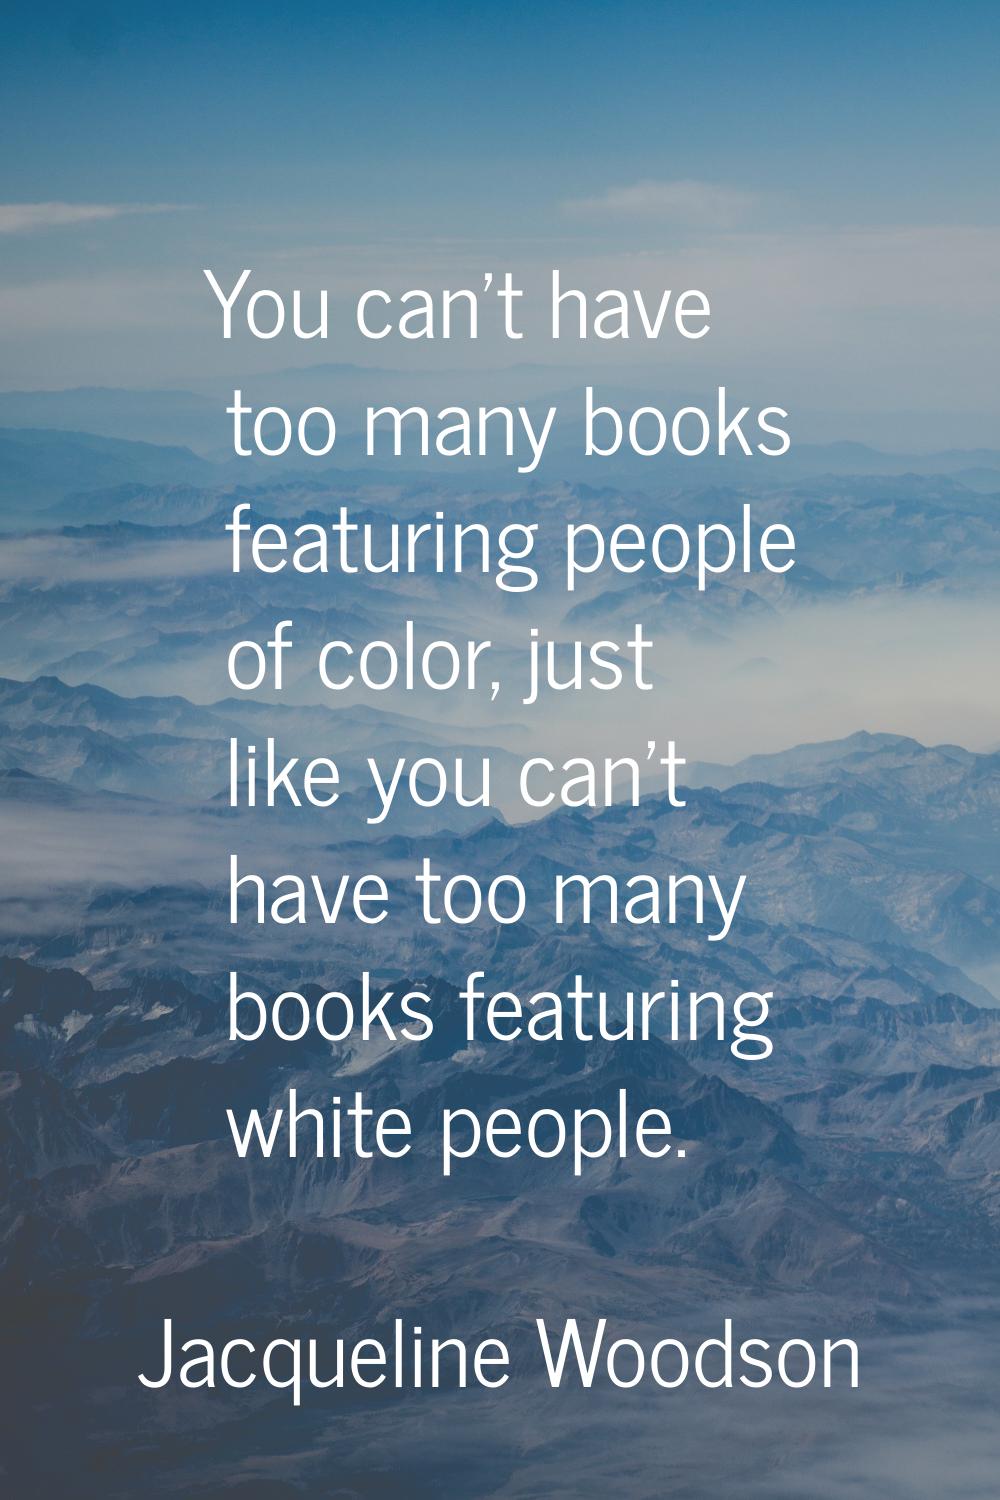 You can't have too many books featuring people of color, just like you can't have too many books fe